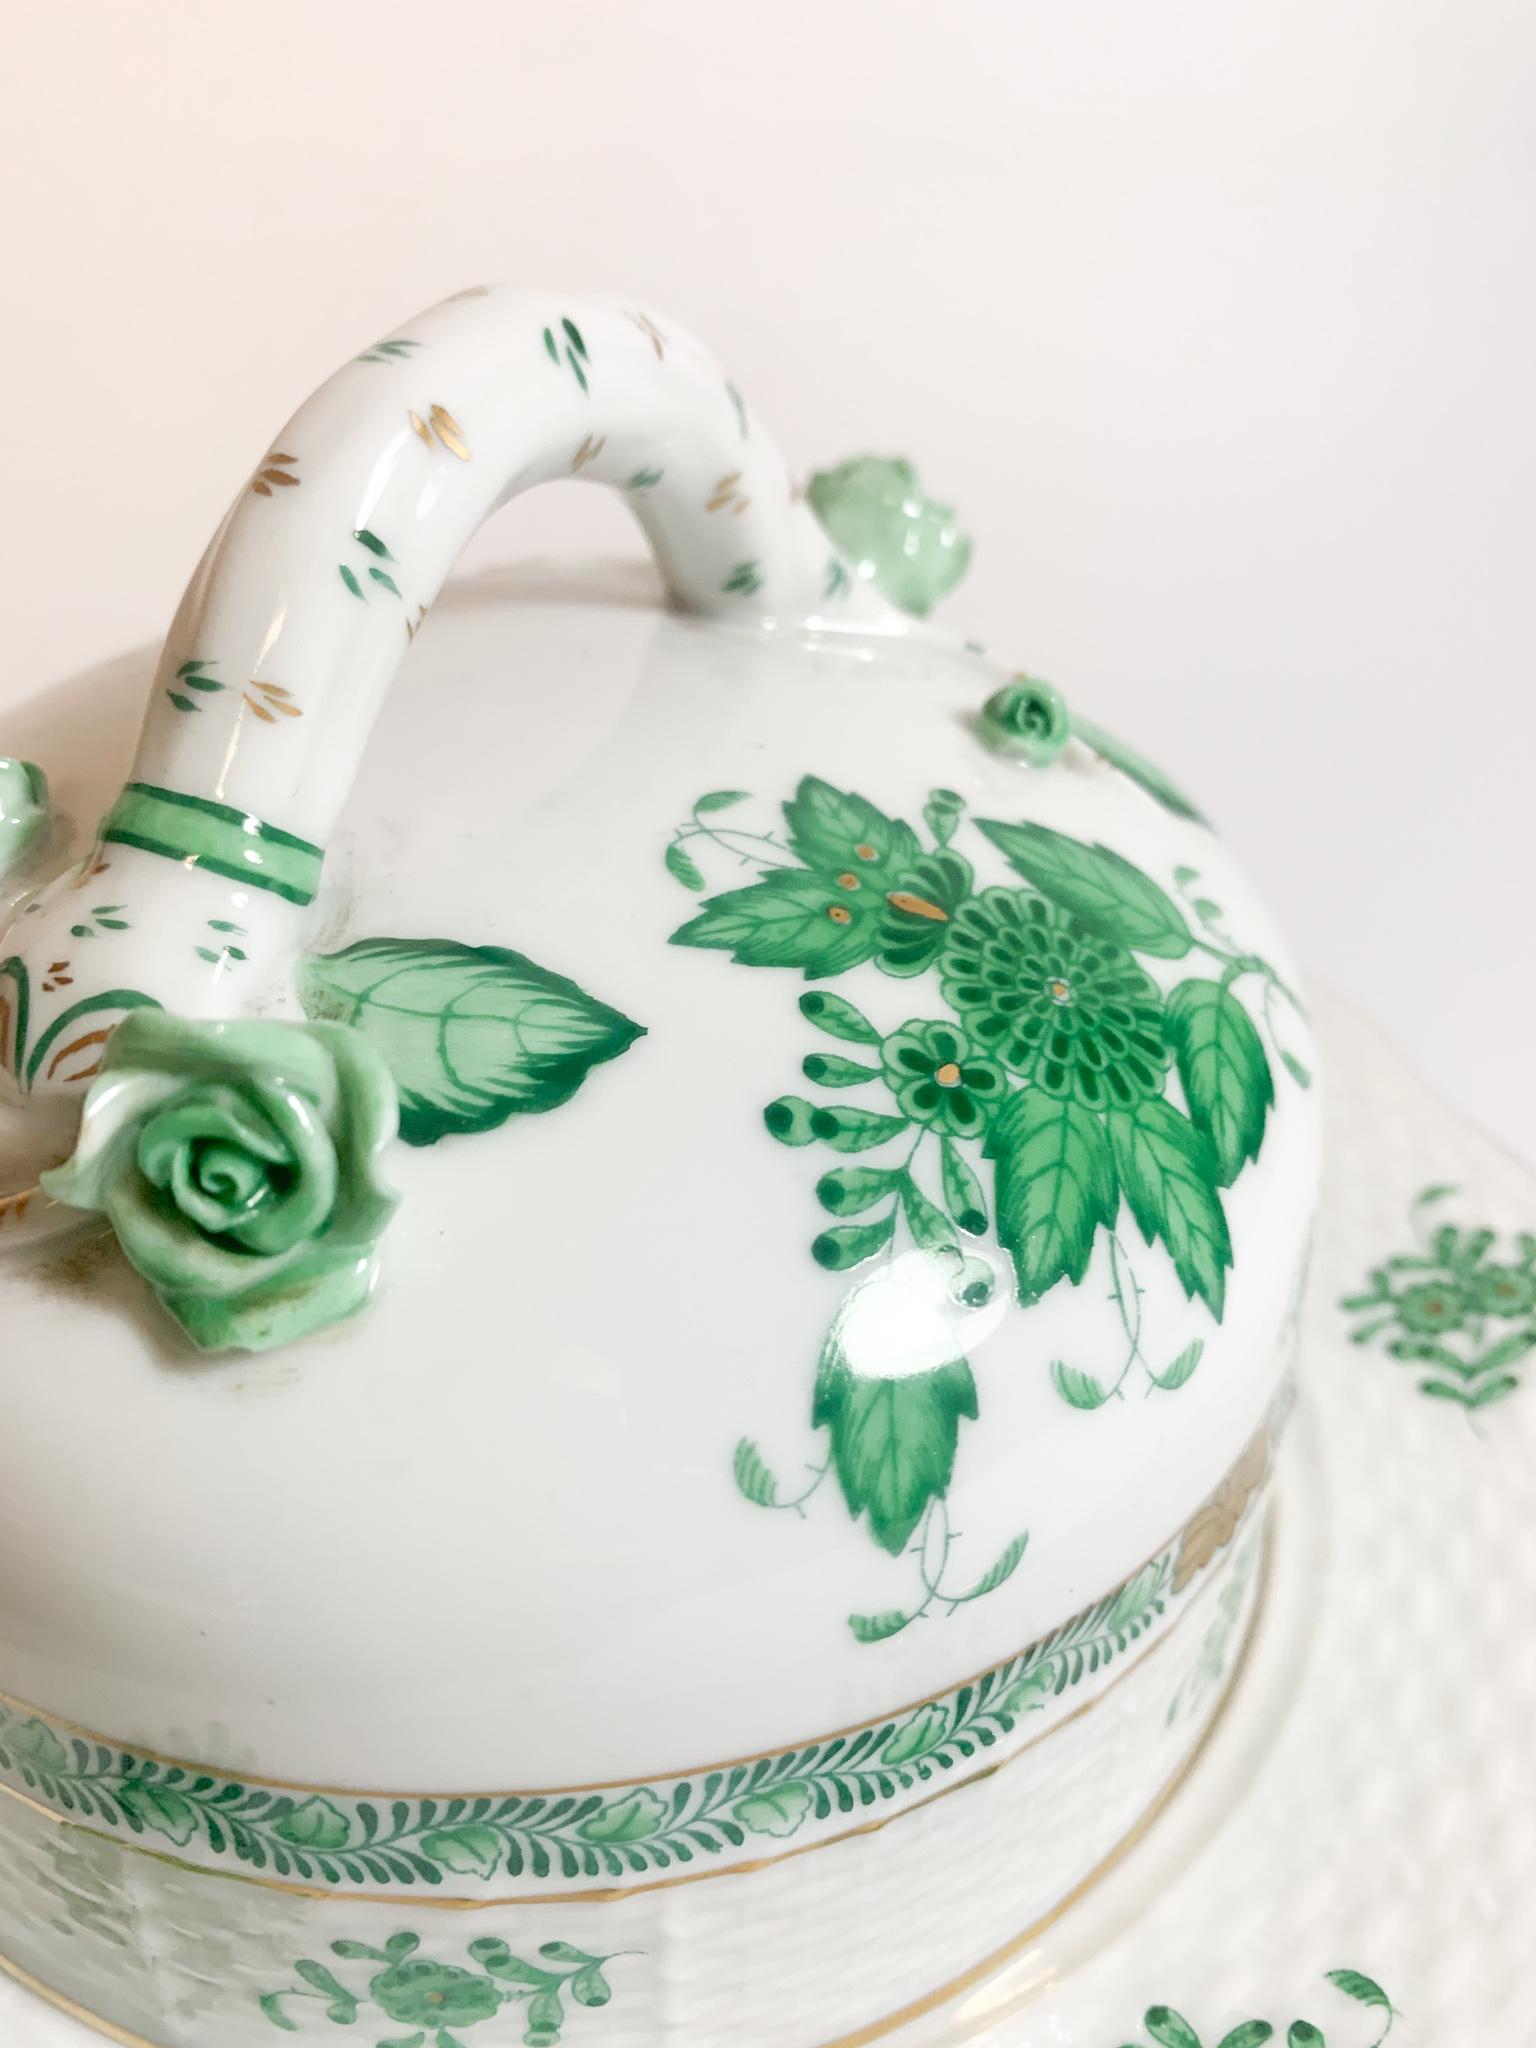 Hungarian Herend Porcelain Butter Dish with Ivy Pattern from the 1950s